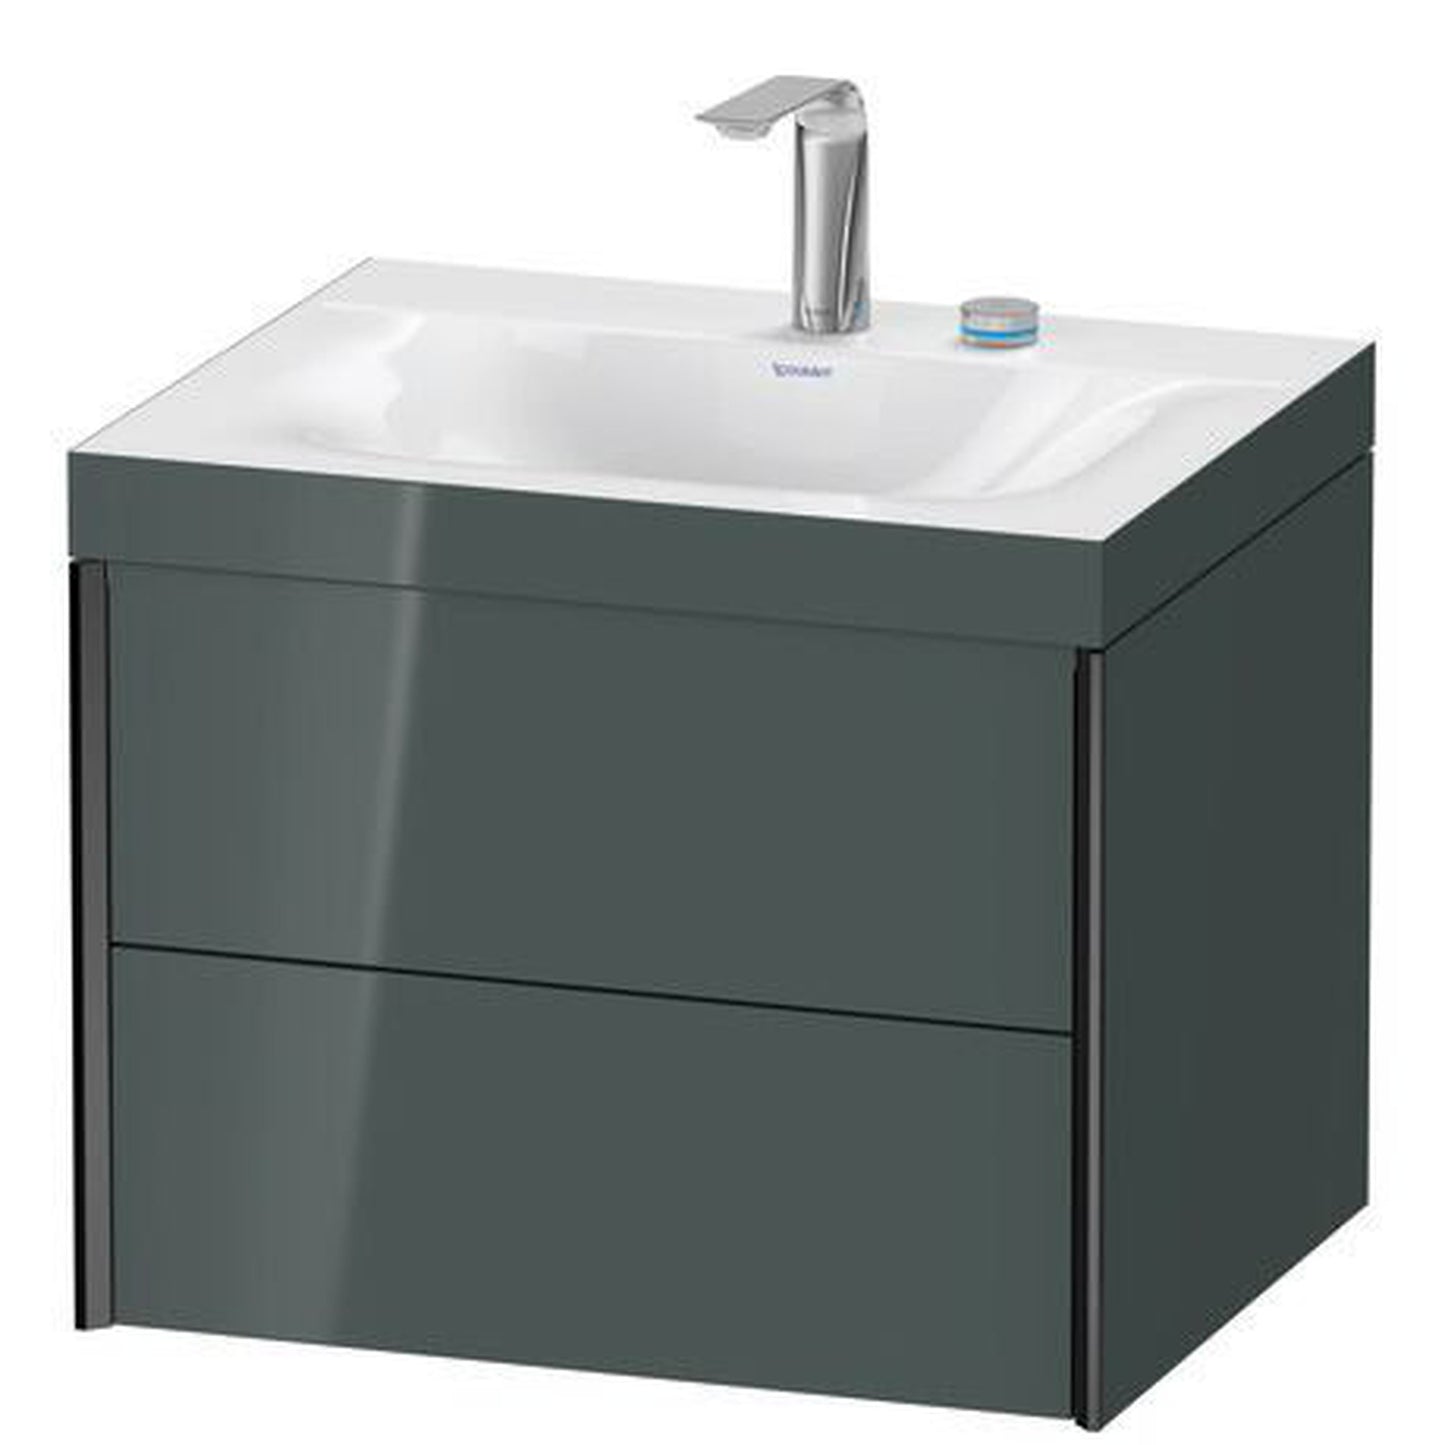 Duravit Xviu 24" x 20" x 19" Two Drawer C-Bonded Wall-Mount Vanity Kit With Two Tap Holes, Dolomite Gray (XV4614EB238C)